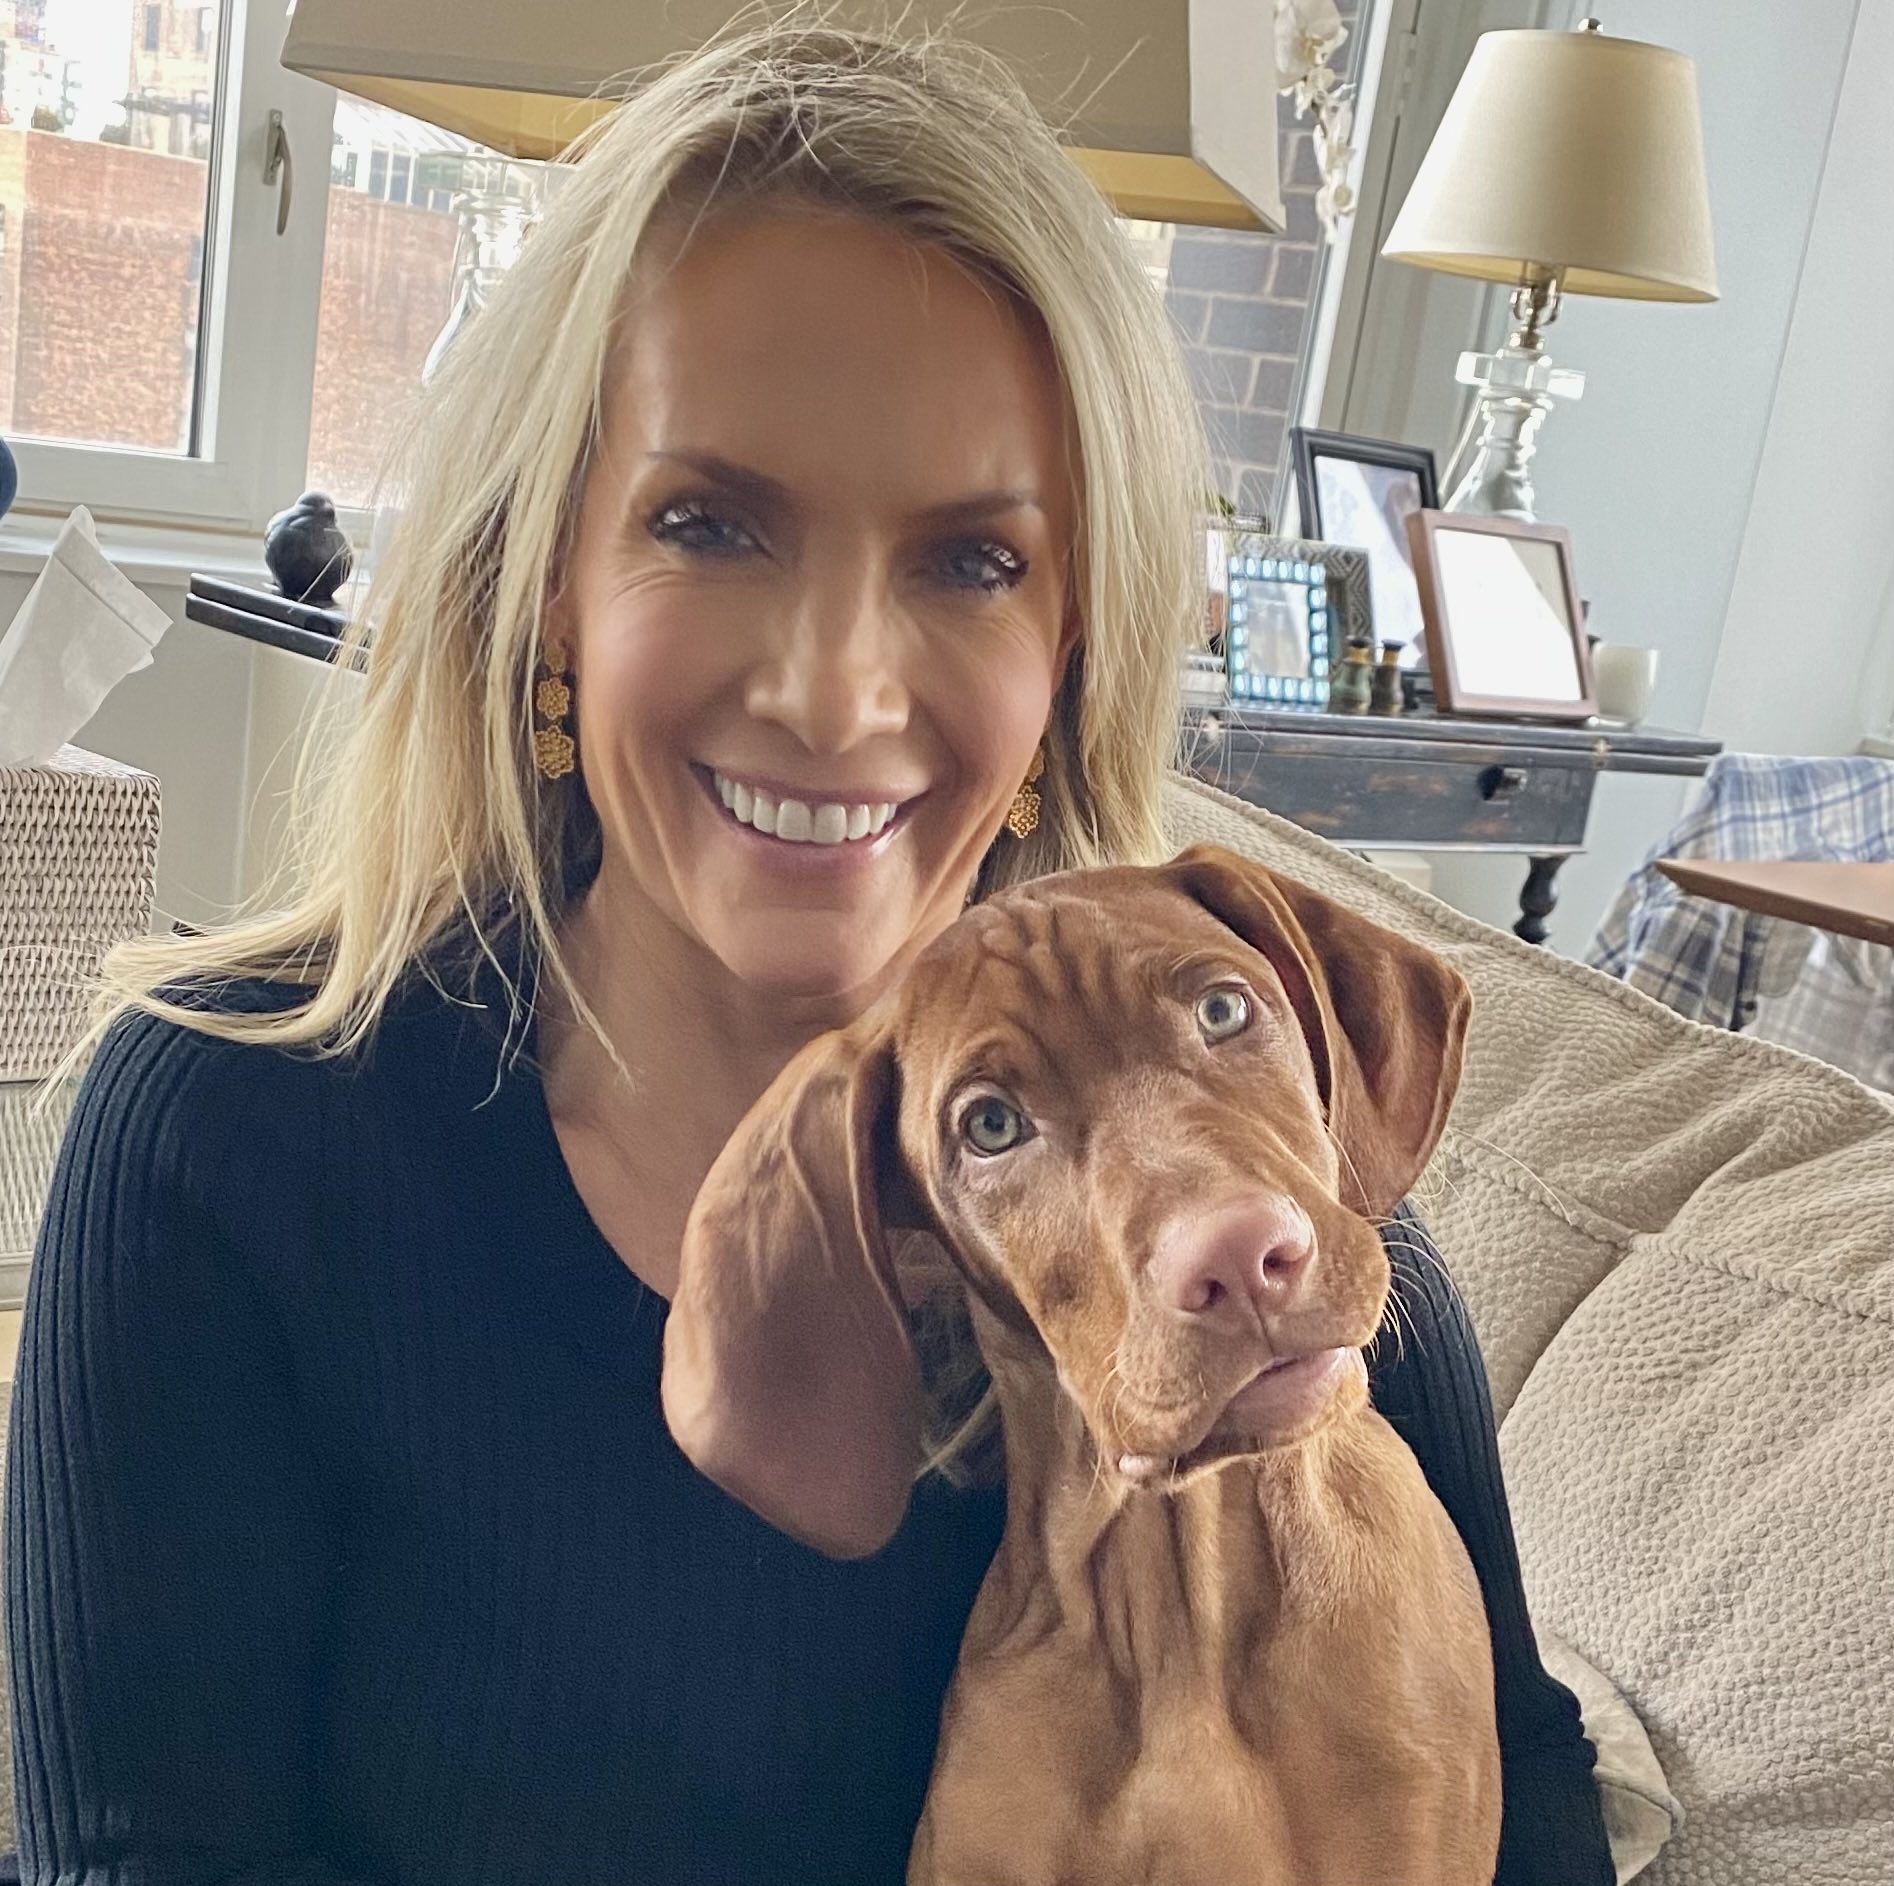 Dana Perino on Twitter: "Why did Percy have to stay the night in the hospital last night? I'll do a segment on it next week. He's just fine now. But I'm upset.